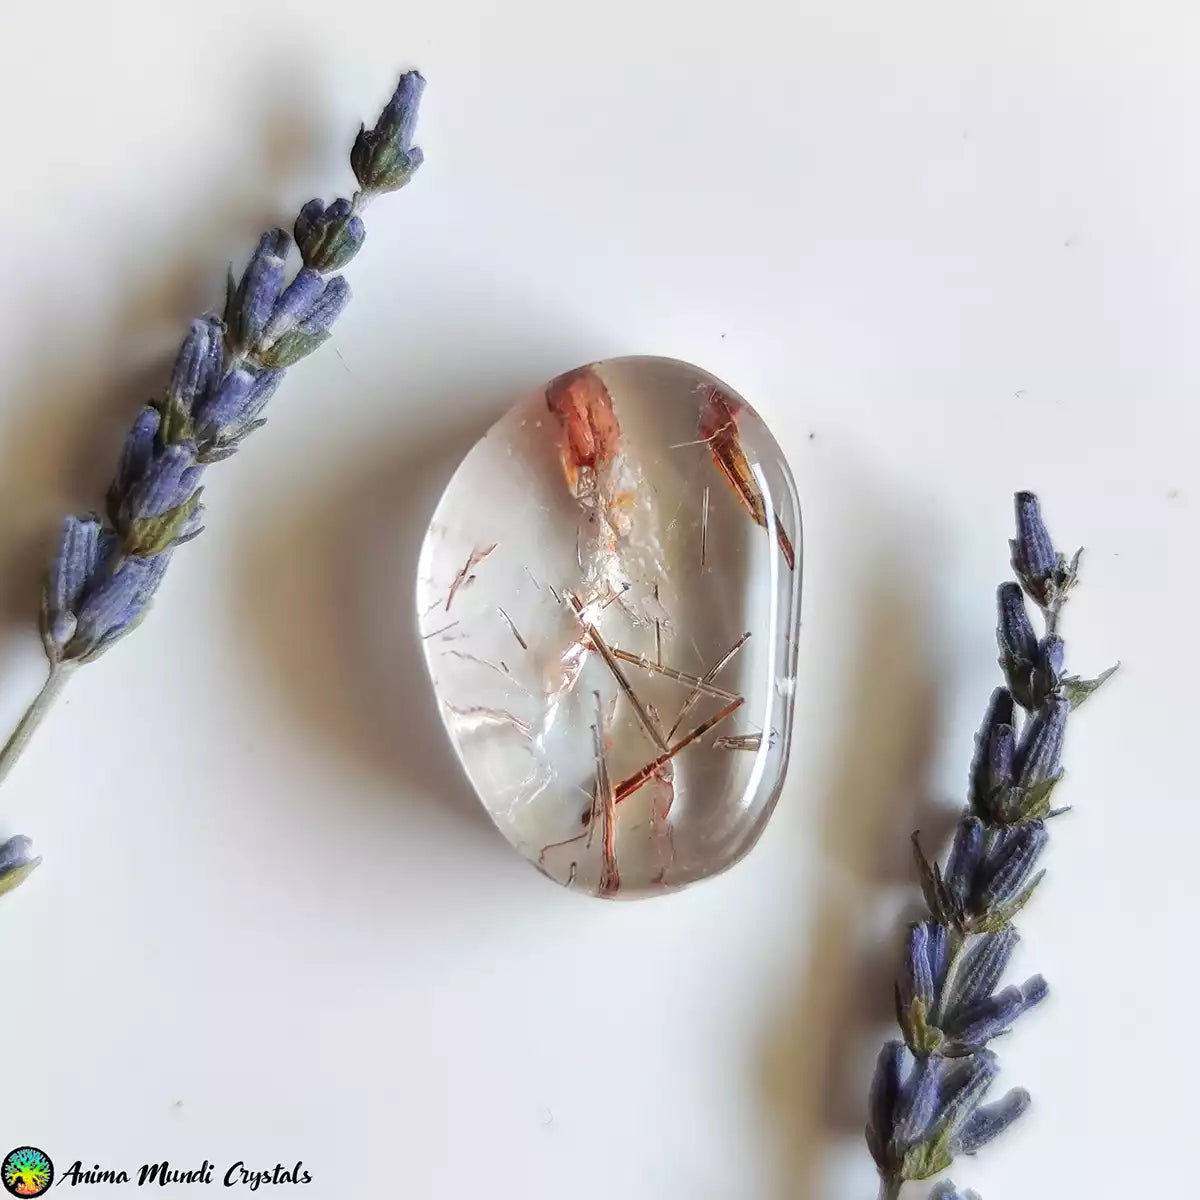 Copper Rutilated Quartz Cabochon with Iron Stain